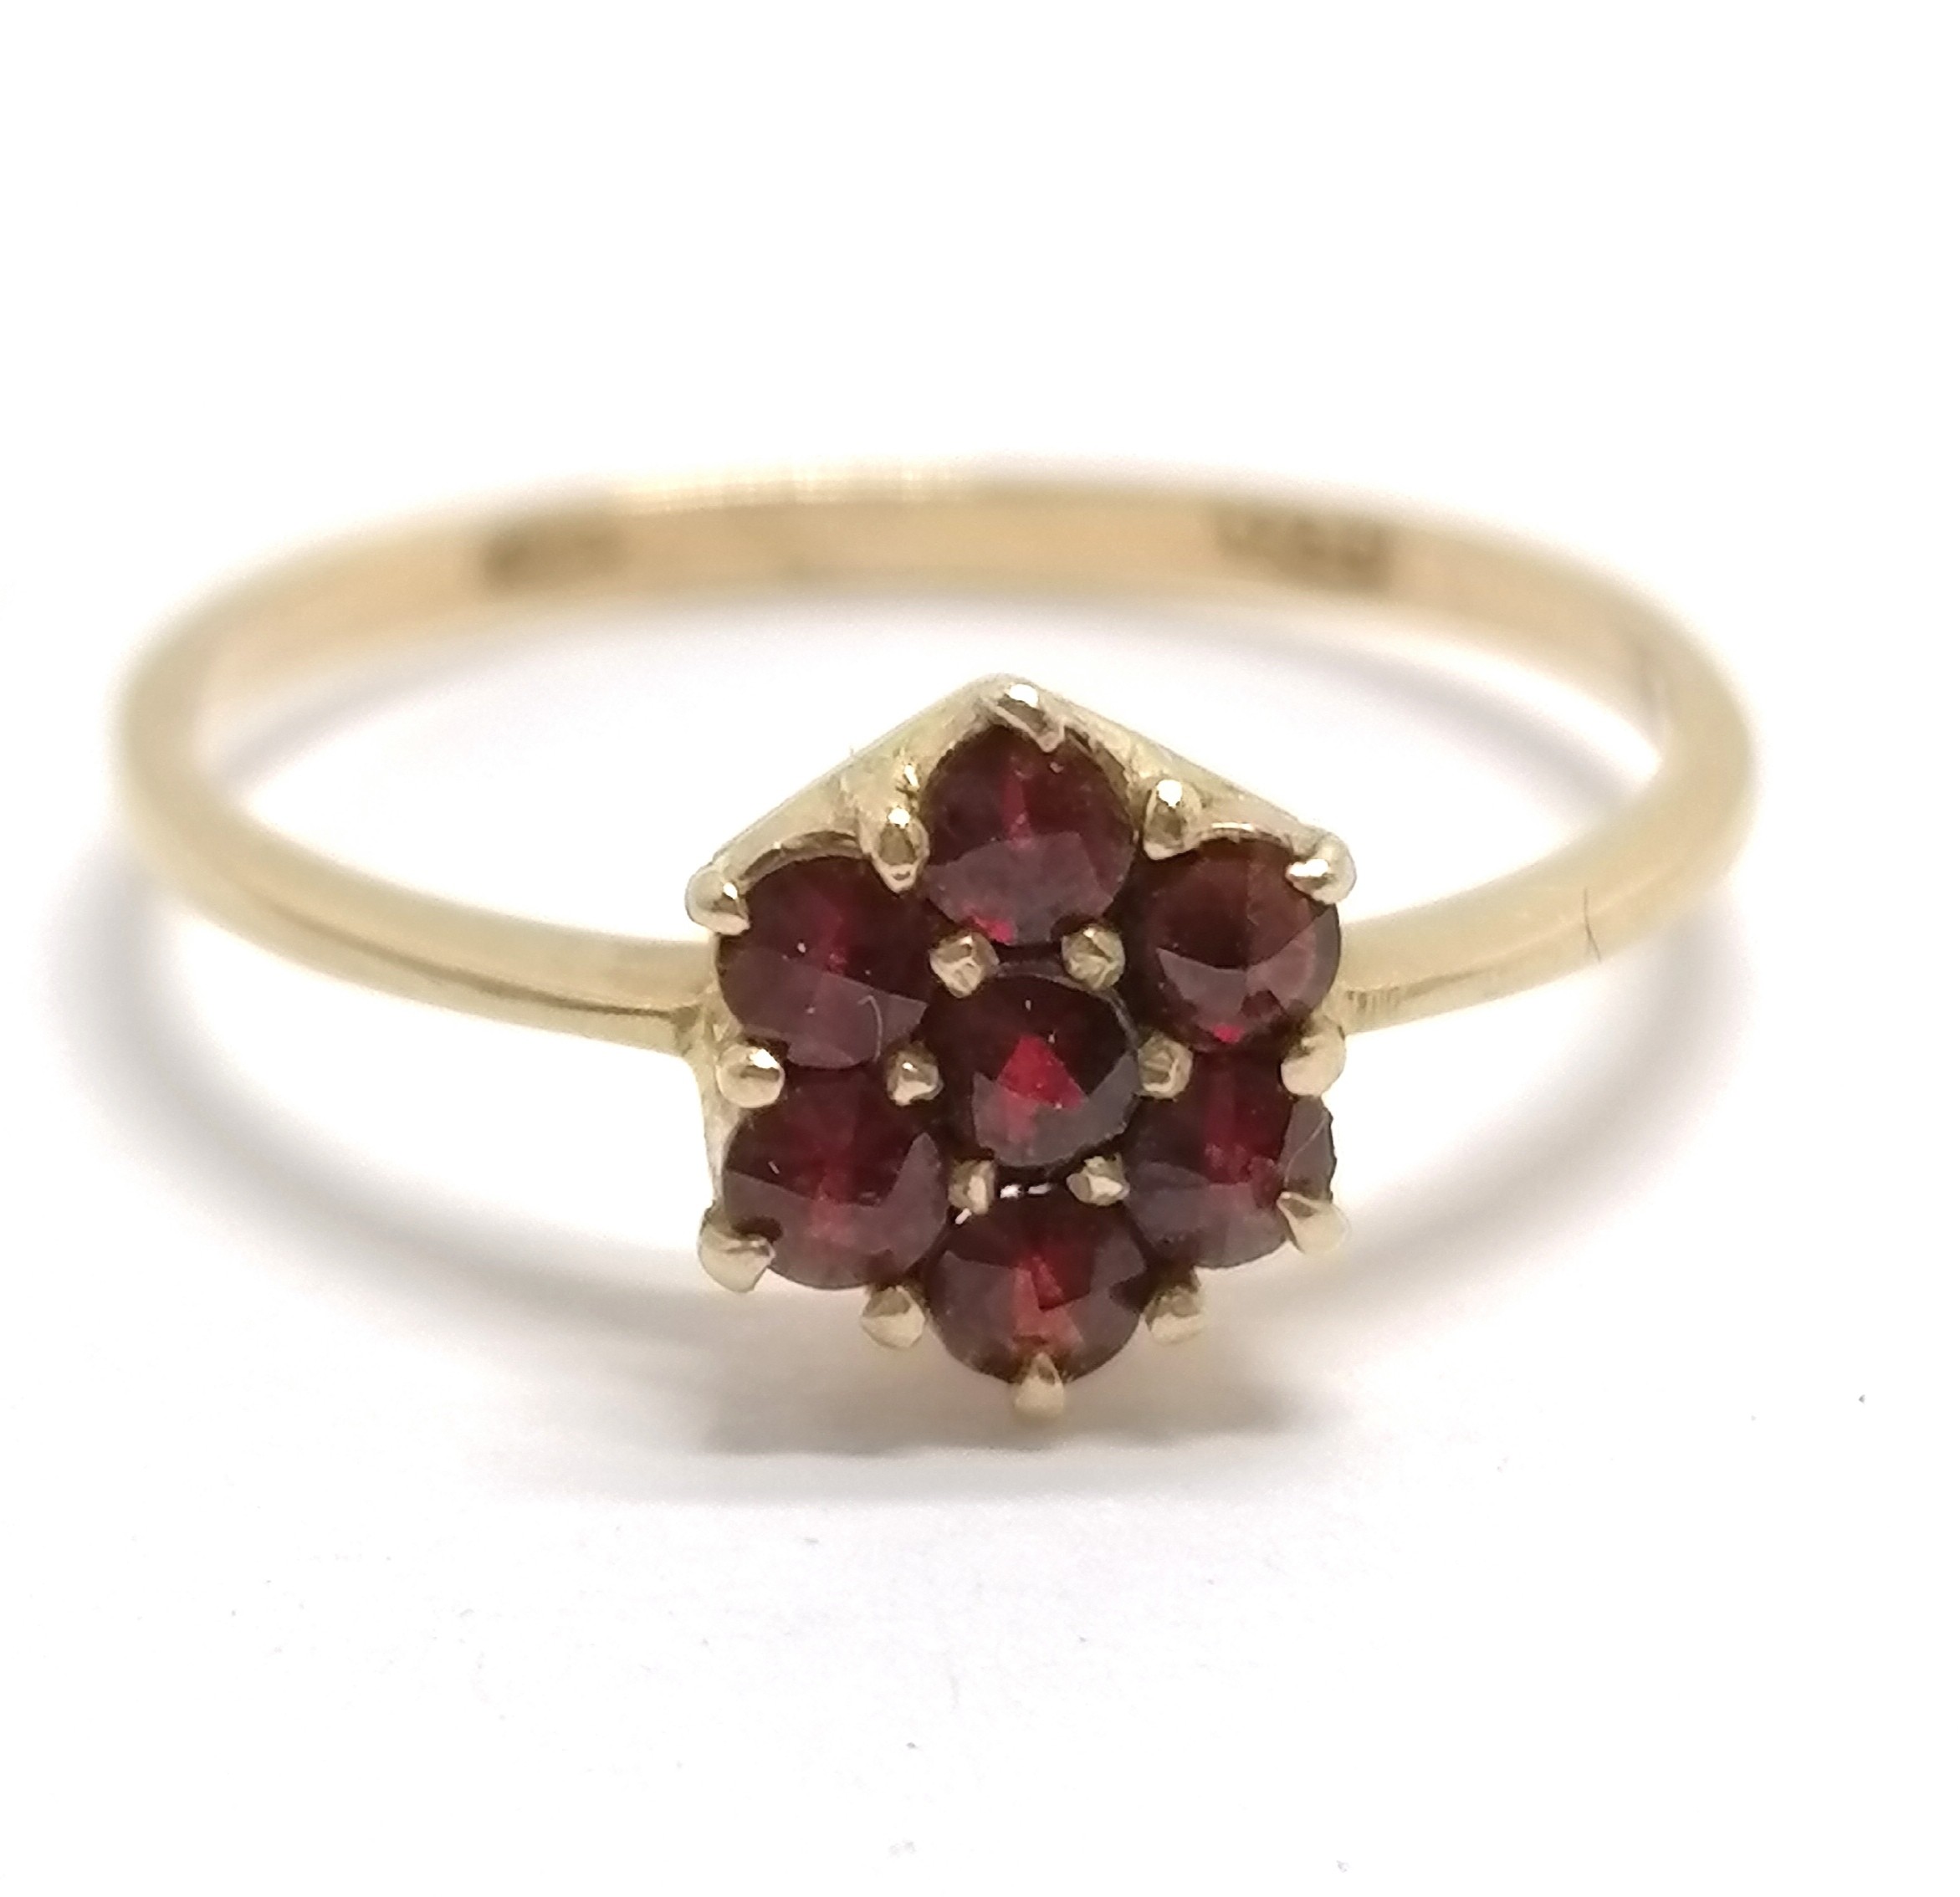 18ct marked gold garnet stone set cluster ring - size N½ & 1.4g total weight